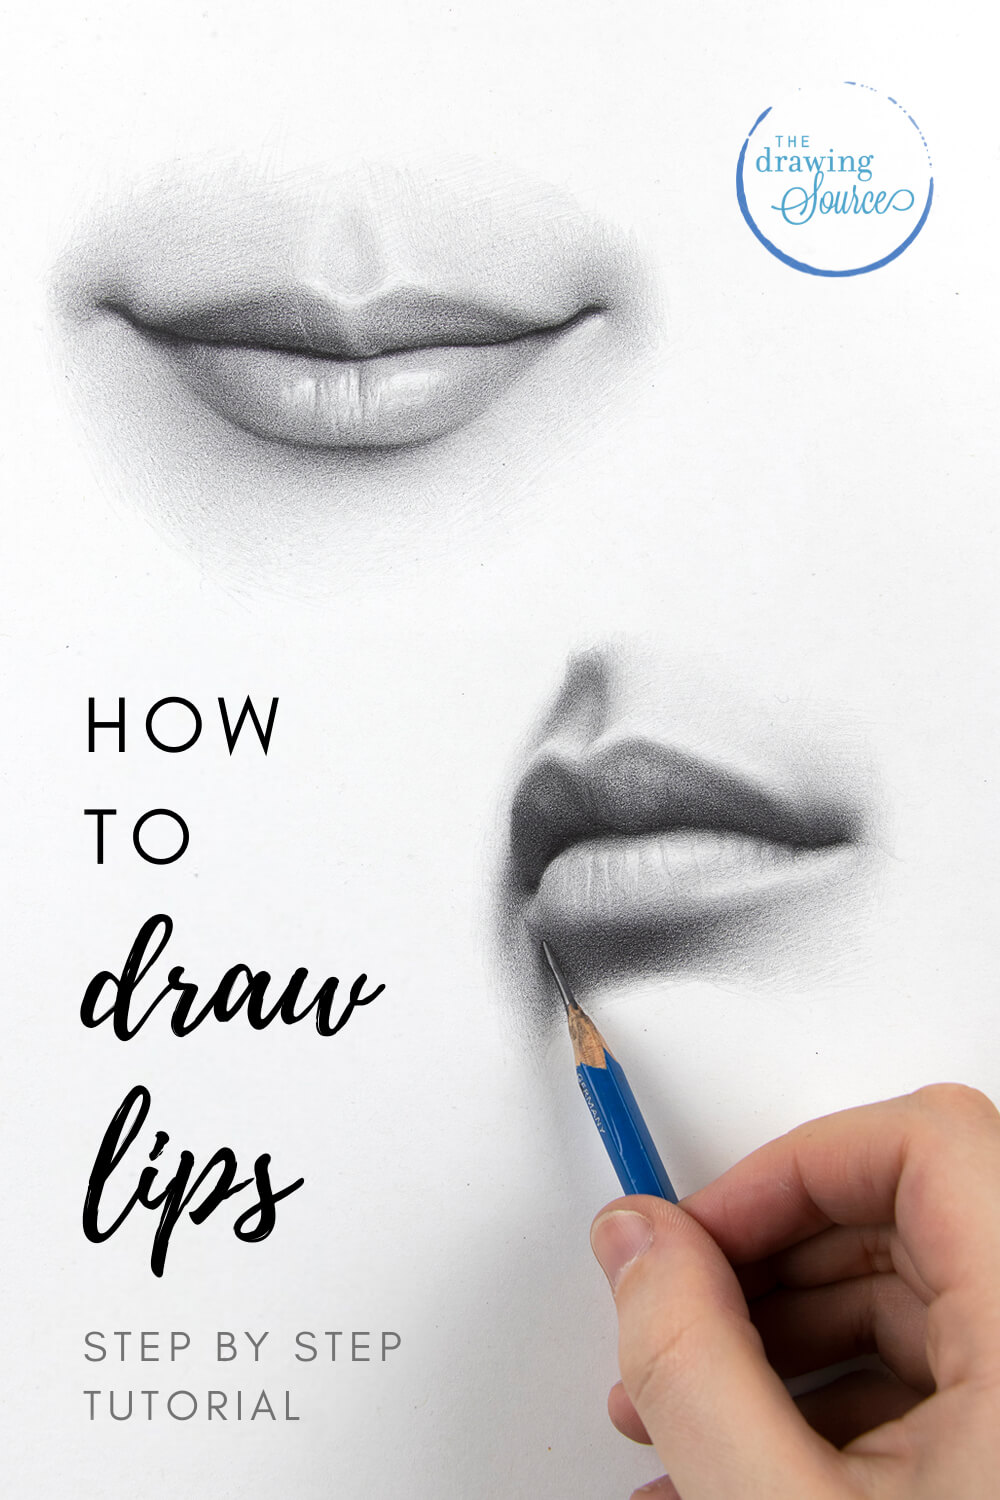 Learn how to draw realistic lips step by step in this detailed tutorial from The Drawing Source.